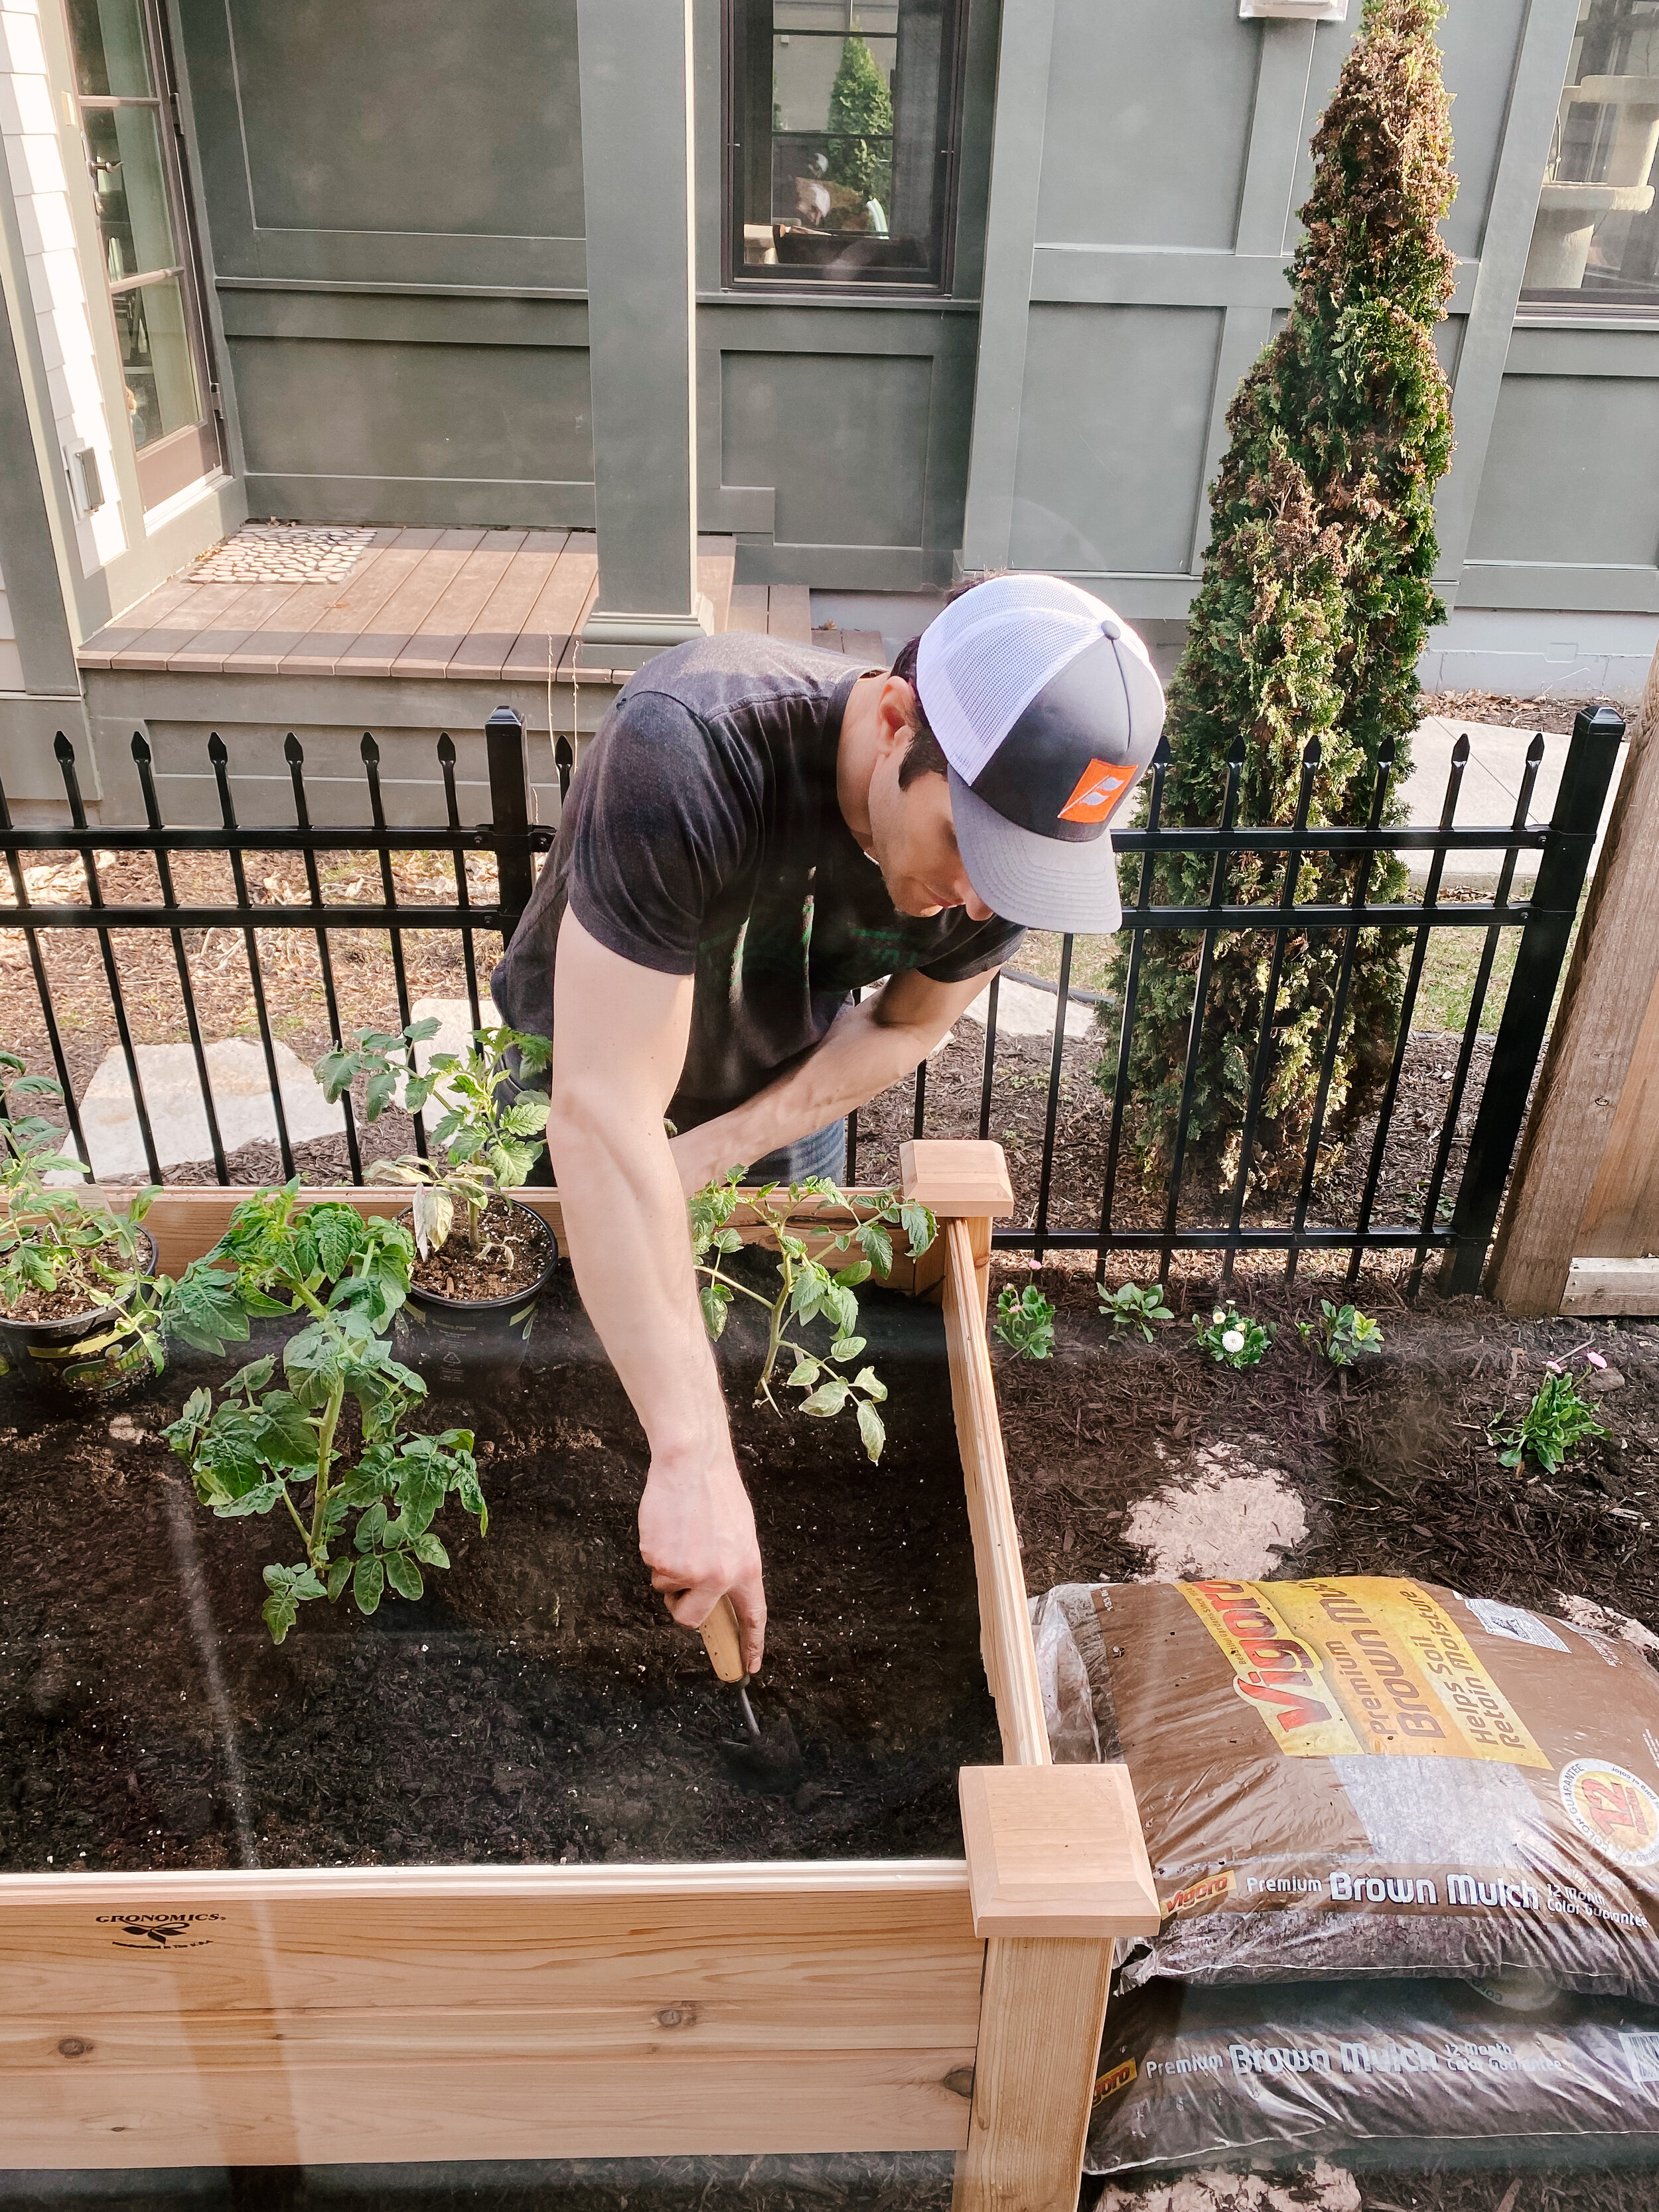 Brian planting the vegetables in the raised garden bed.